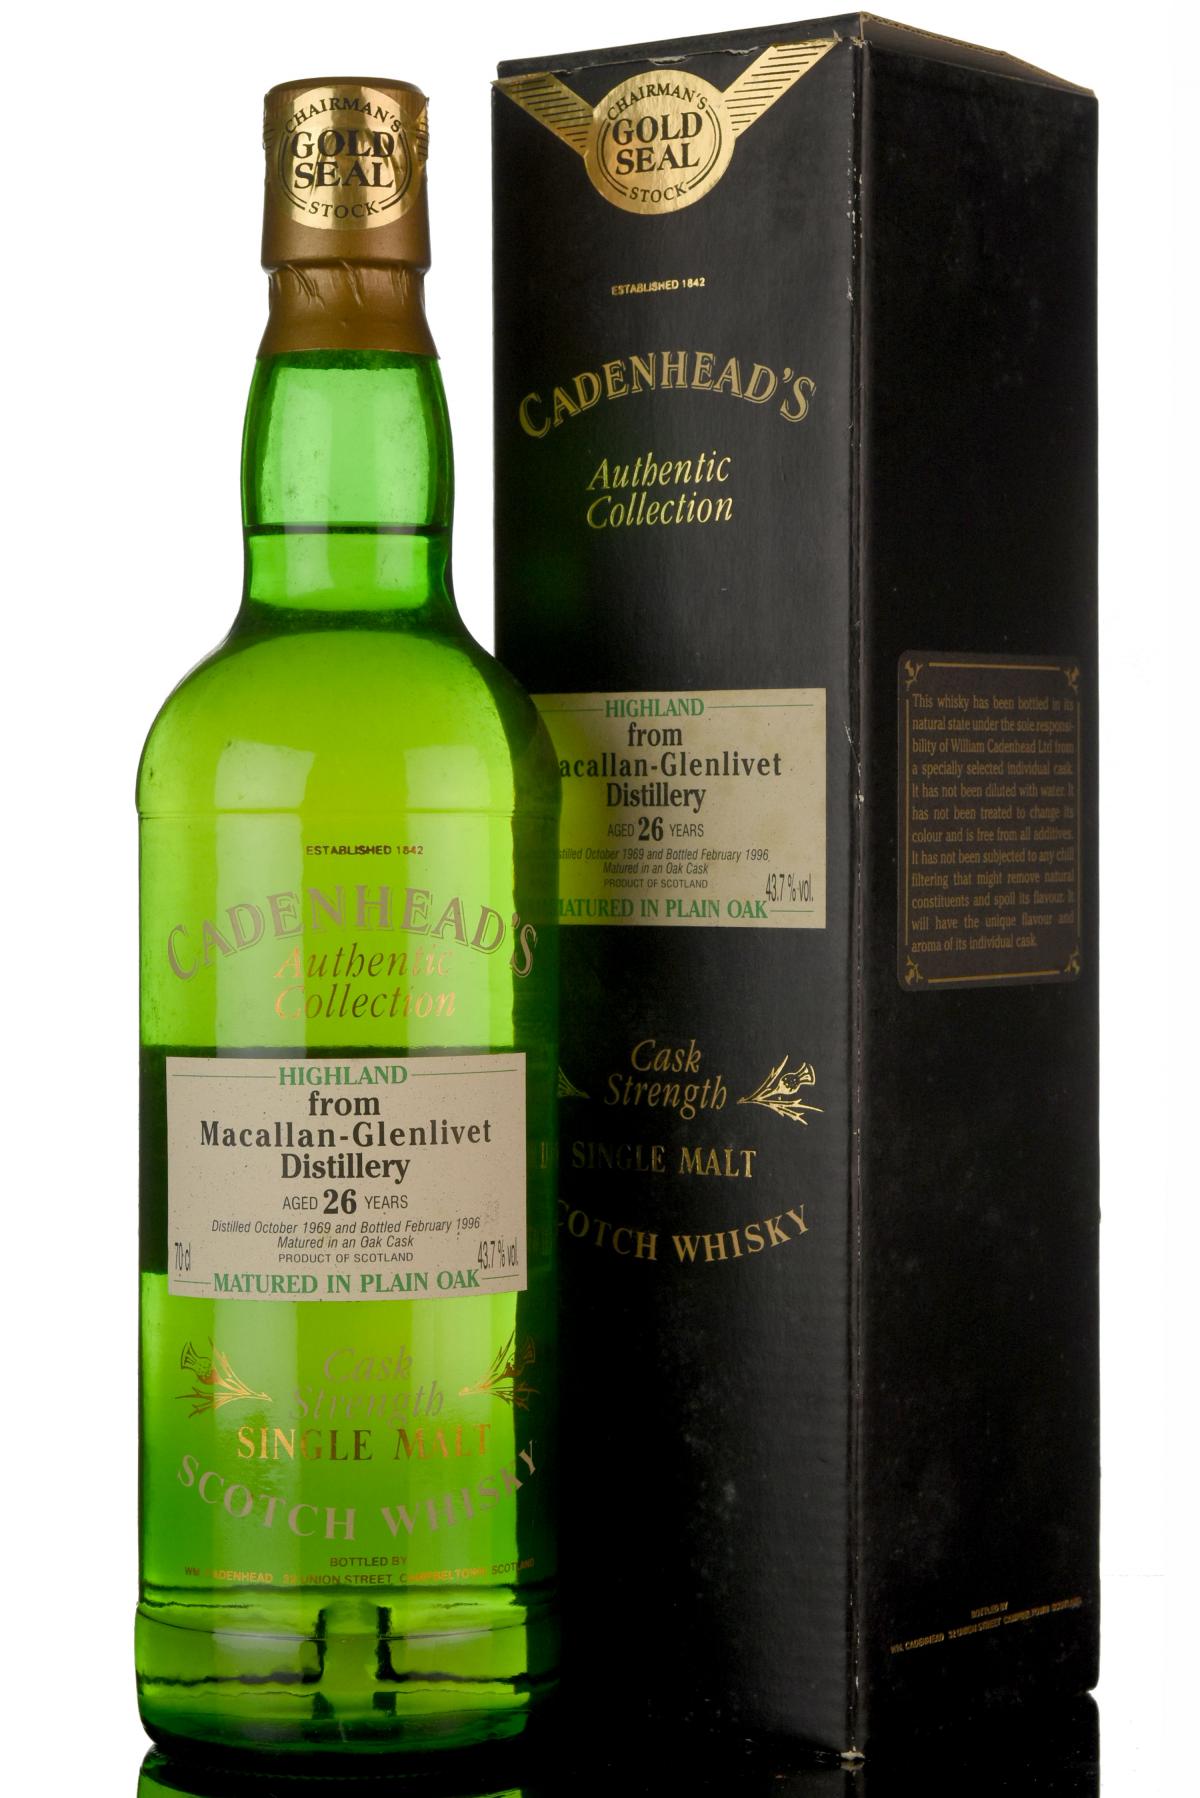 Macallan-Glenlivet 1969-1996 - 26 Year Old - Cadenheads Authentic Collection